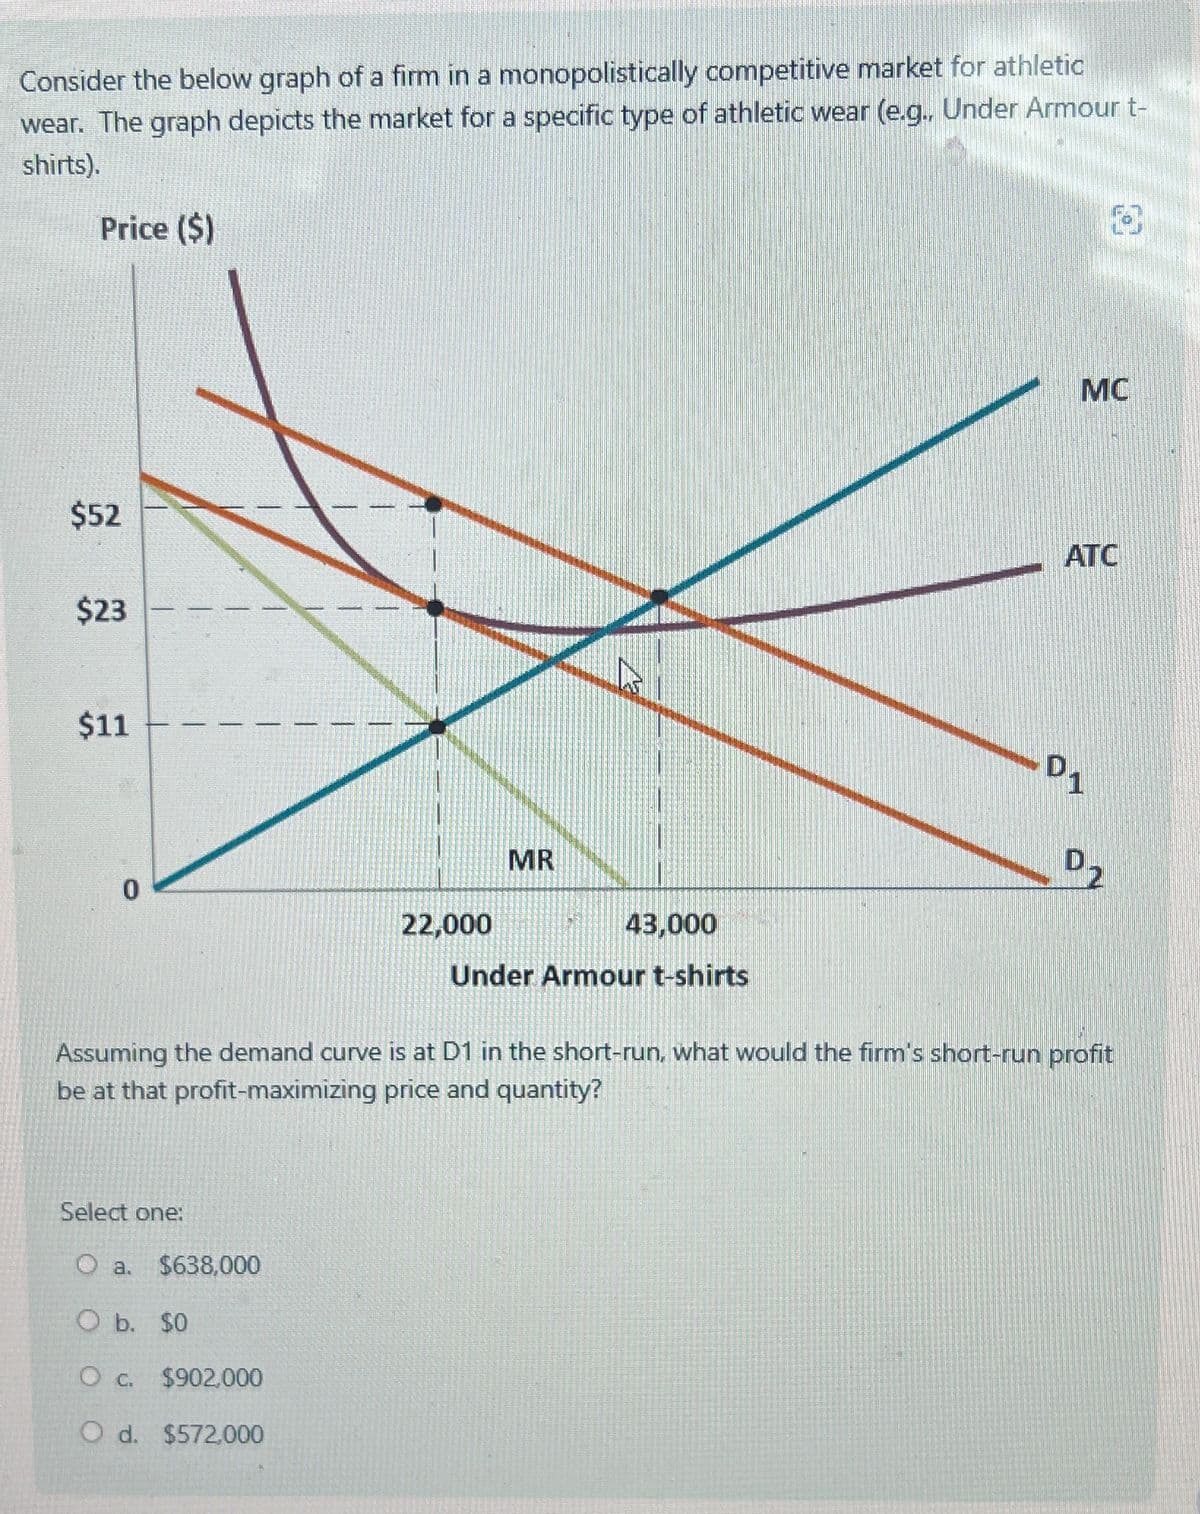 Consider the below graph of a firm in a monopolistically competitive market for athletic
wear. The graph depicts the market for a specific type of athletic wear (e.g., Under Armour t-
shirts).
Price ($)
$52
$23
$11
0
MR
22,000
43,000
Under Armour t-shirts
MC
ATC
D1
D₂
Assuming the demand curve is at D1 in the short-run, what would the firm's short-run profit
be at that profit-maximizing price and quantity?
Select one:
O a.
$638,000
O b. $0
O c. $902,000
O d. $572,000